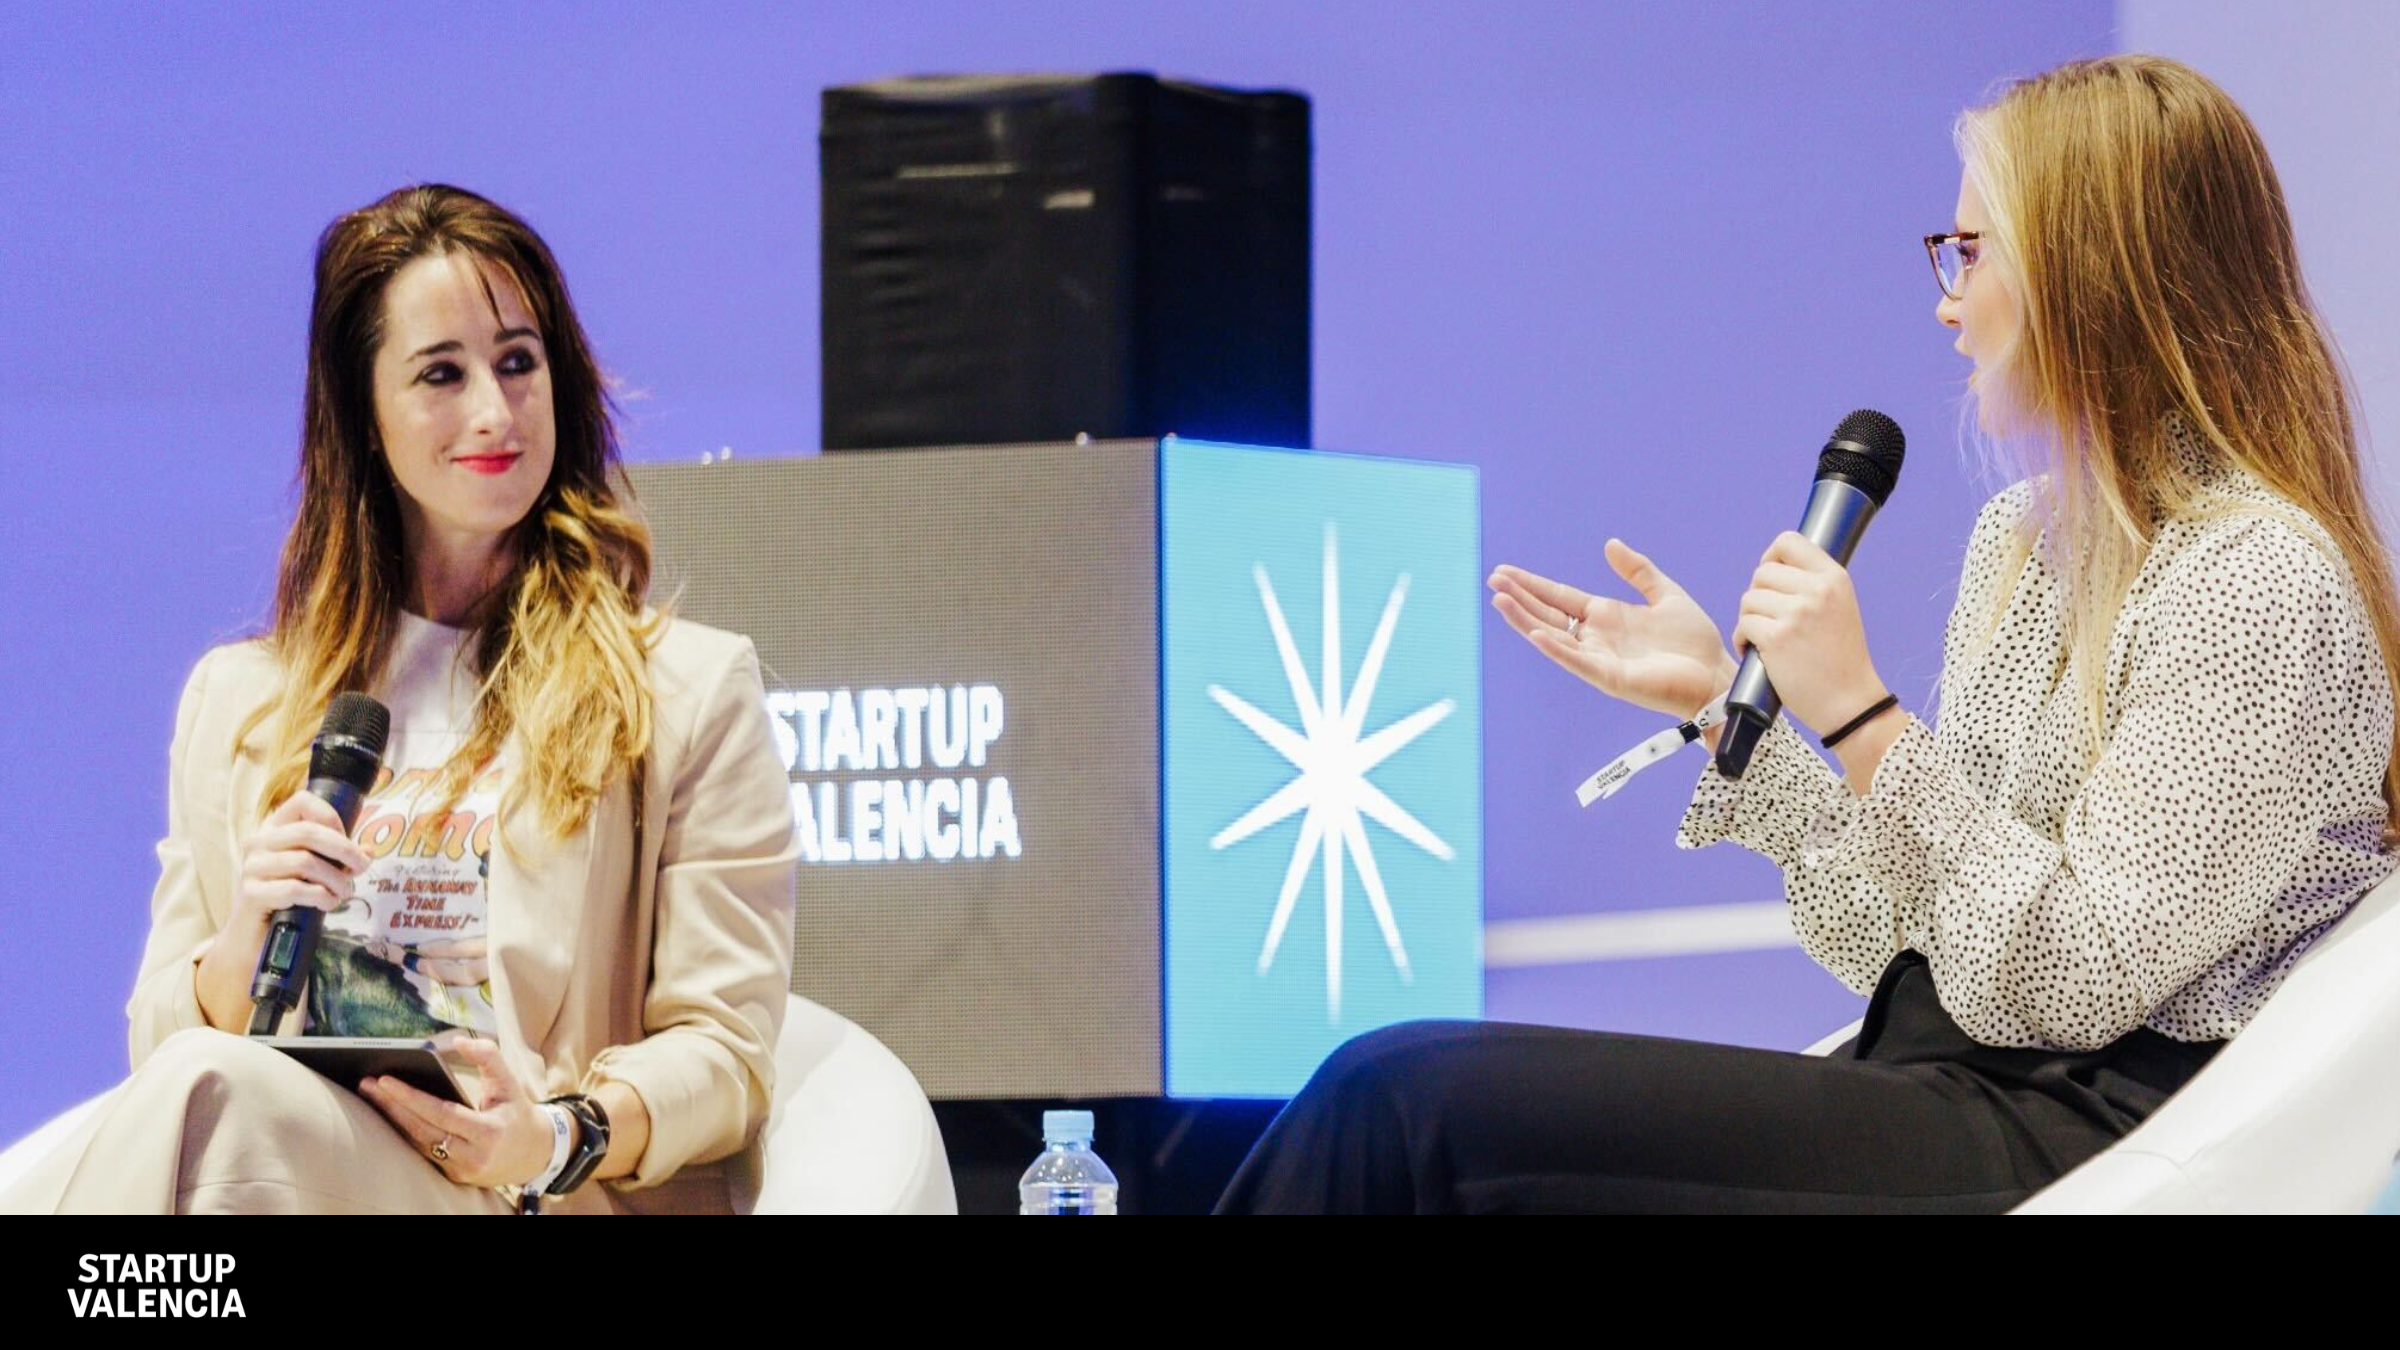 startups founded by women